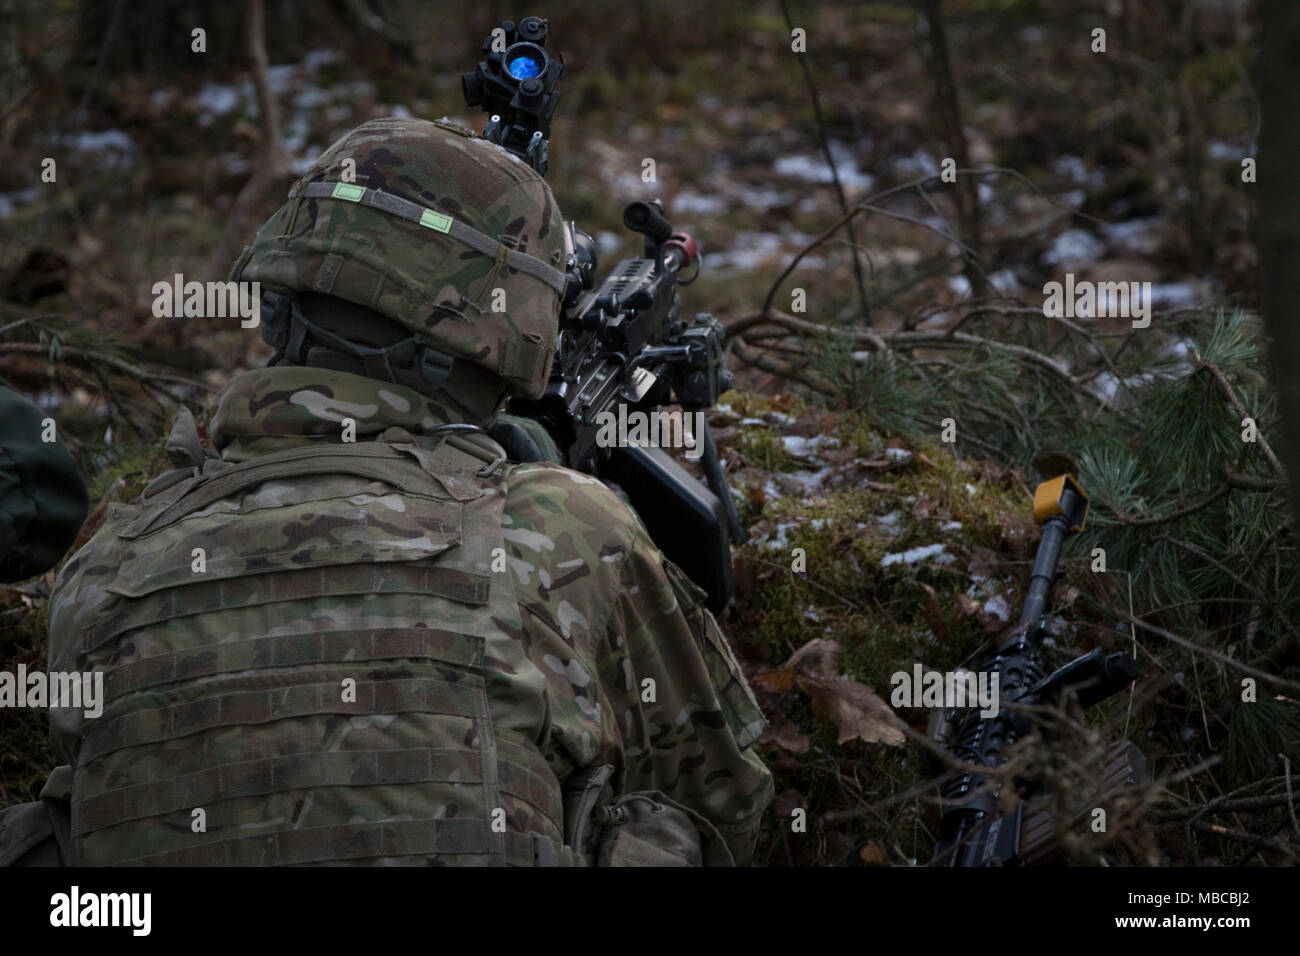 A U.S. Soldier assigned to Iron Troop, 3rd Squadron, 2nd Cavalry Regiment, pulls security while participating in the multinational training exercise Puma at a range near the Bemowo Piskie Training Area, Poland, Feb. 19, 2018. These Soldiers are part of the unique, multinational battle group comprised of U.S., U.K., Croatian and Romanian soldiers who serve with the Polish 15th Mechanized Brigade as a deterrence force in northeast Poland in support of NATO’s Enhanced Forward Presence. (U.S. Army Stock Photo